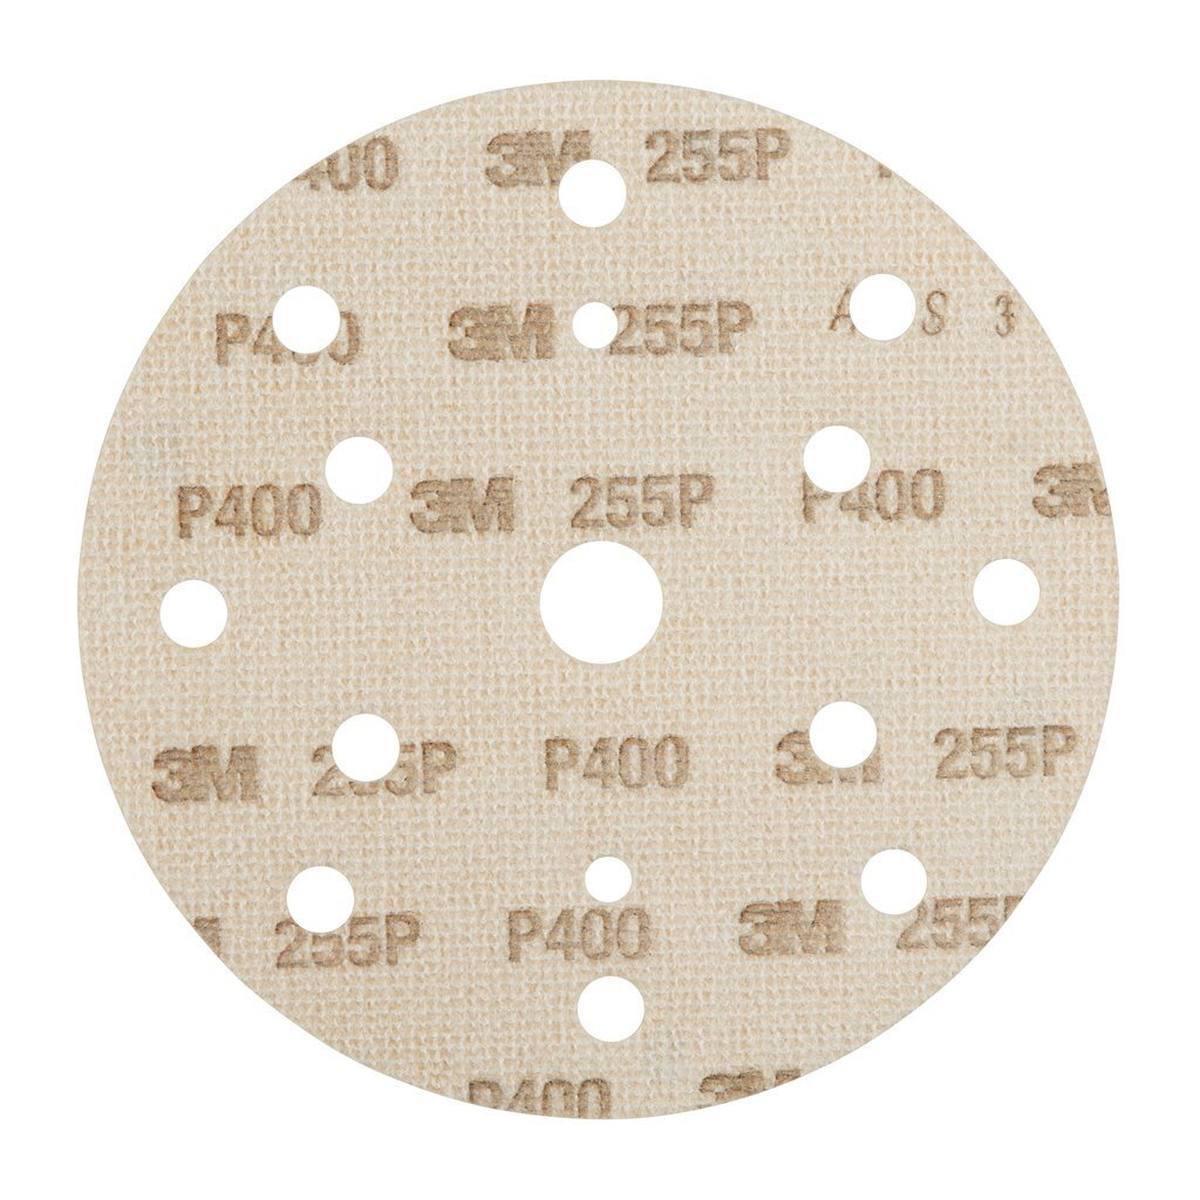 3M Hookit Gold Premium 255P+, 150 mm, P400, perforated 15 times #50453